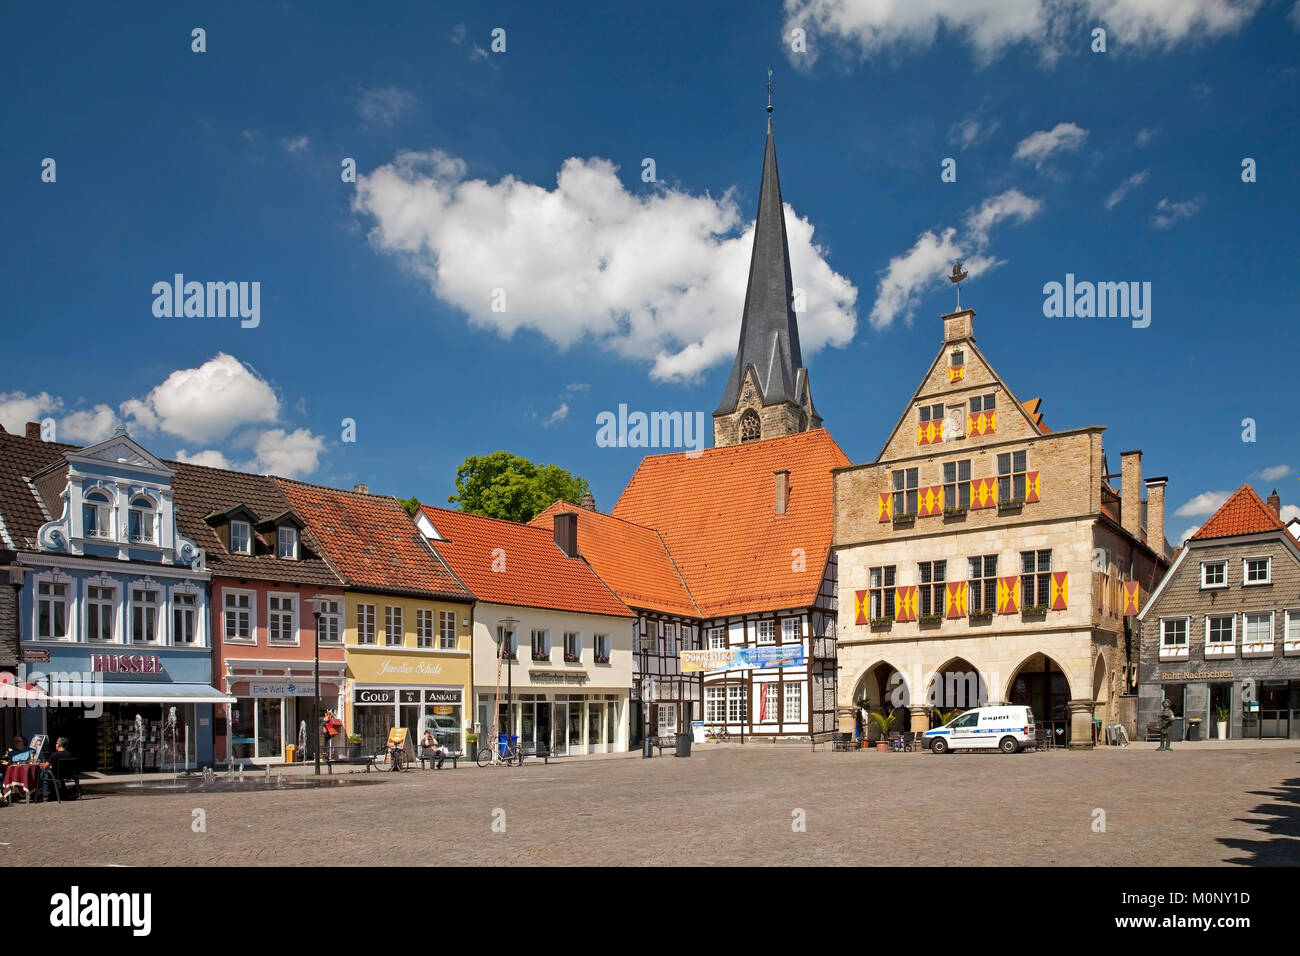 Market place with town hall,Werne,North Rhine-Westphalia,Germany Stock Photo